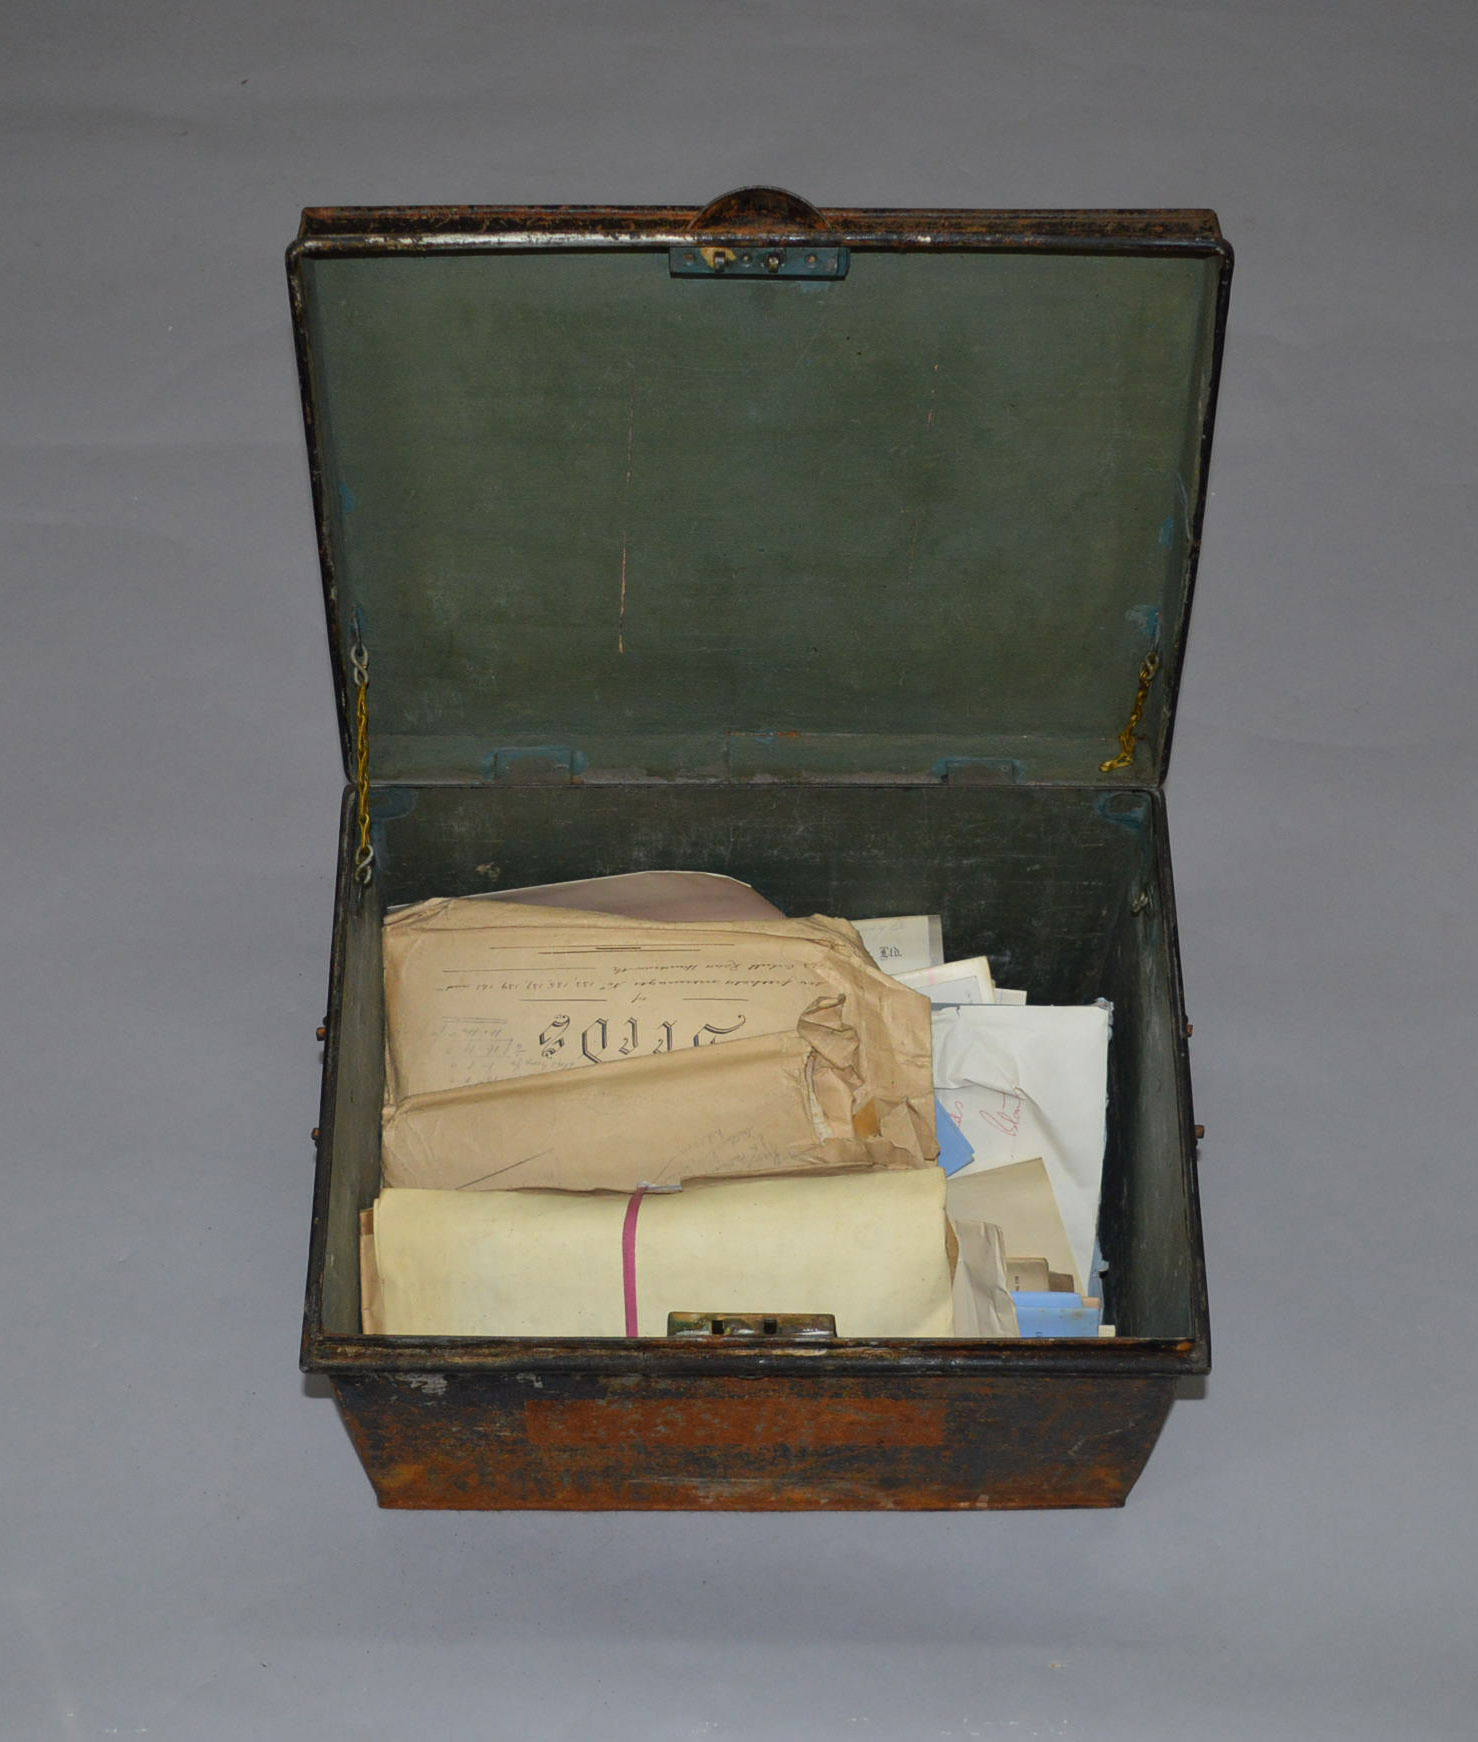 Approx 150 historical documents dating from the late 19th century to mid 20th century.